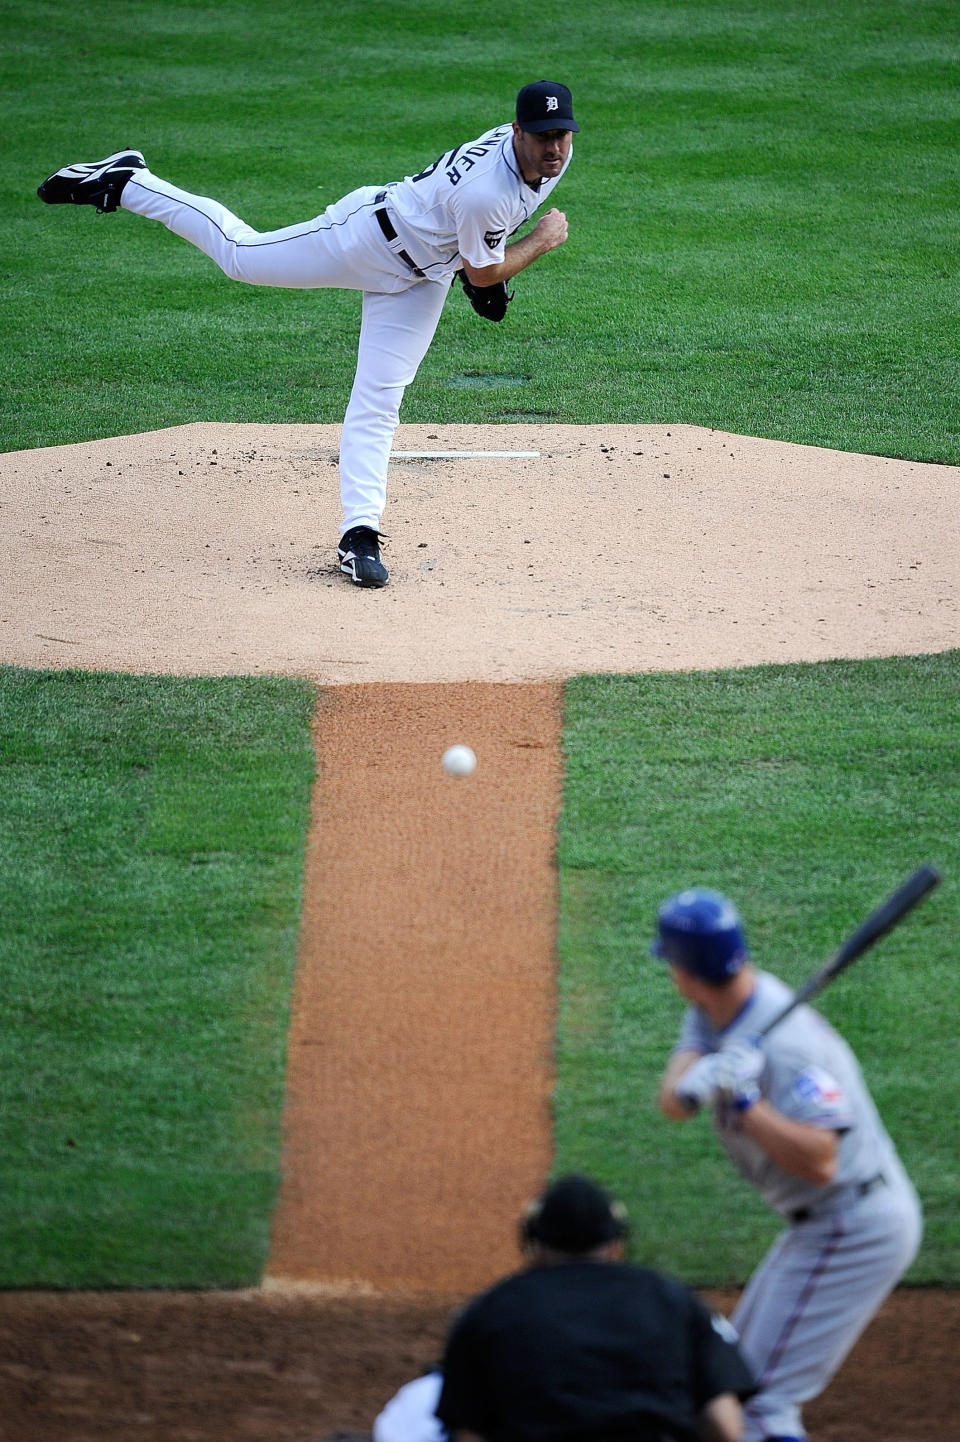 DETROIT, MI - OCTOBER 13: Justin Verlander #35 of the Detroit Tigers throws a pitch against the Detroit Tigers in Game Five of the American League Championship Series at Comerica Park on October 13, 2011 in Detroit, Michigan. (Photo by Kevork Djansezian/Getty Images)